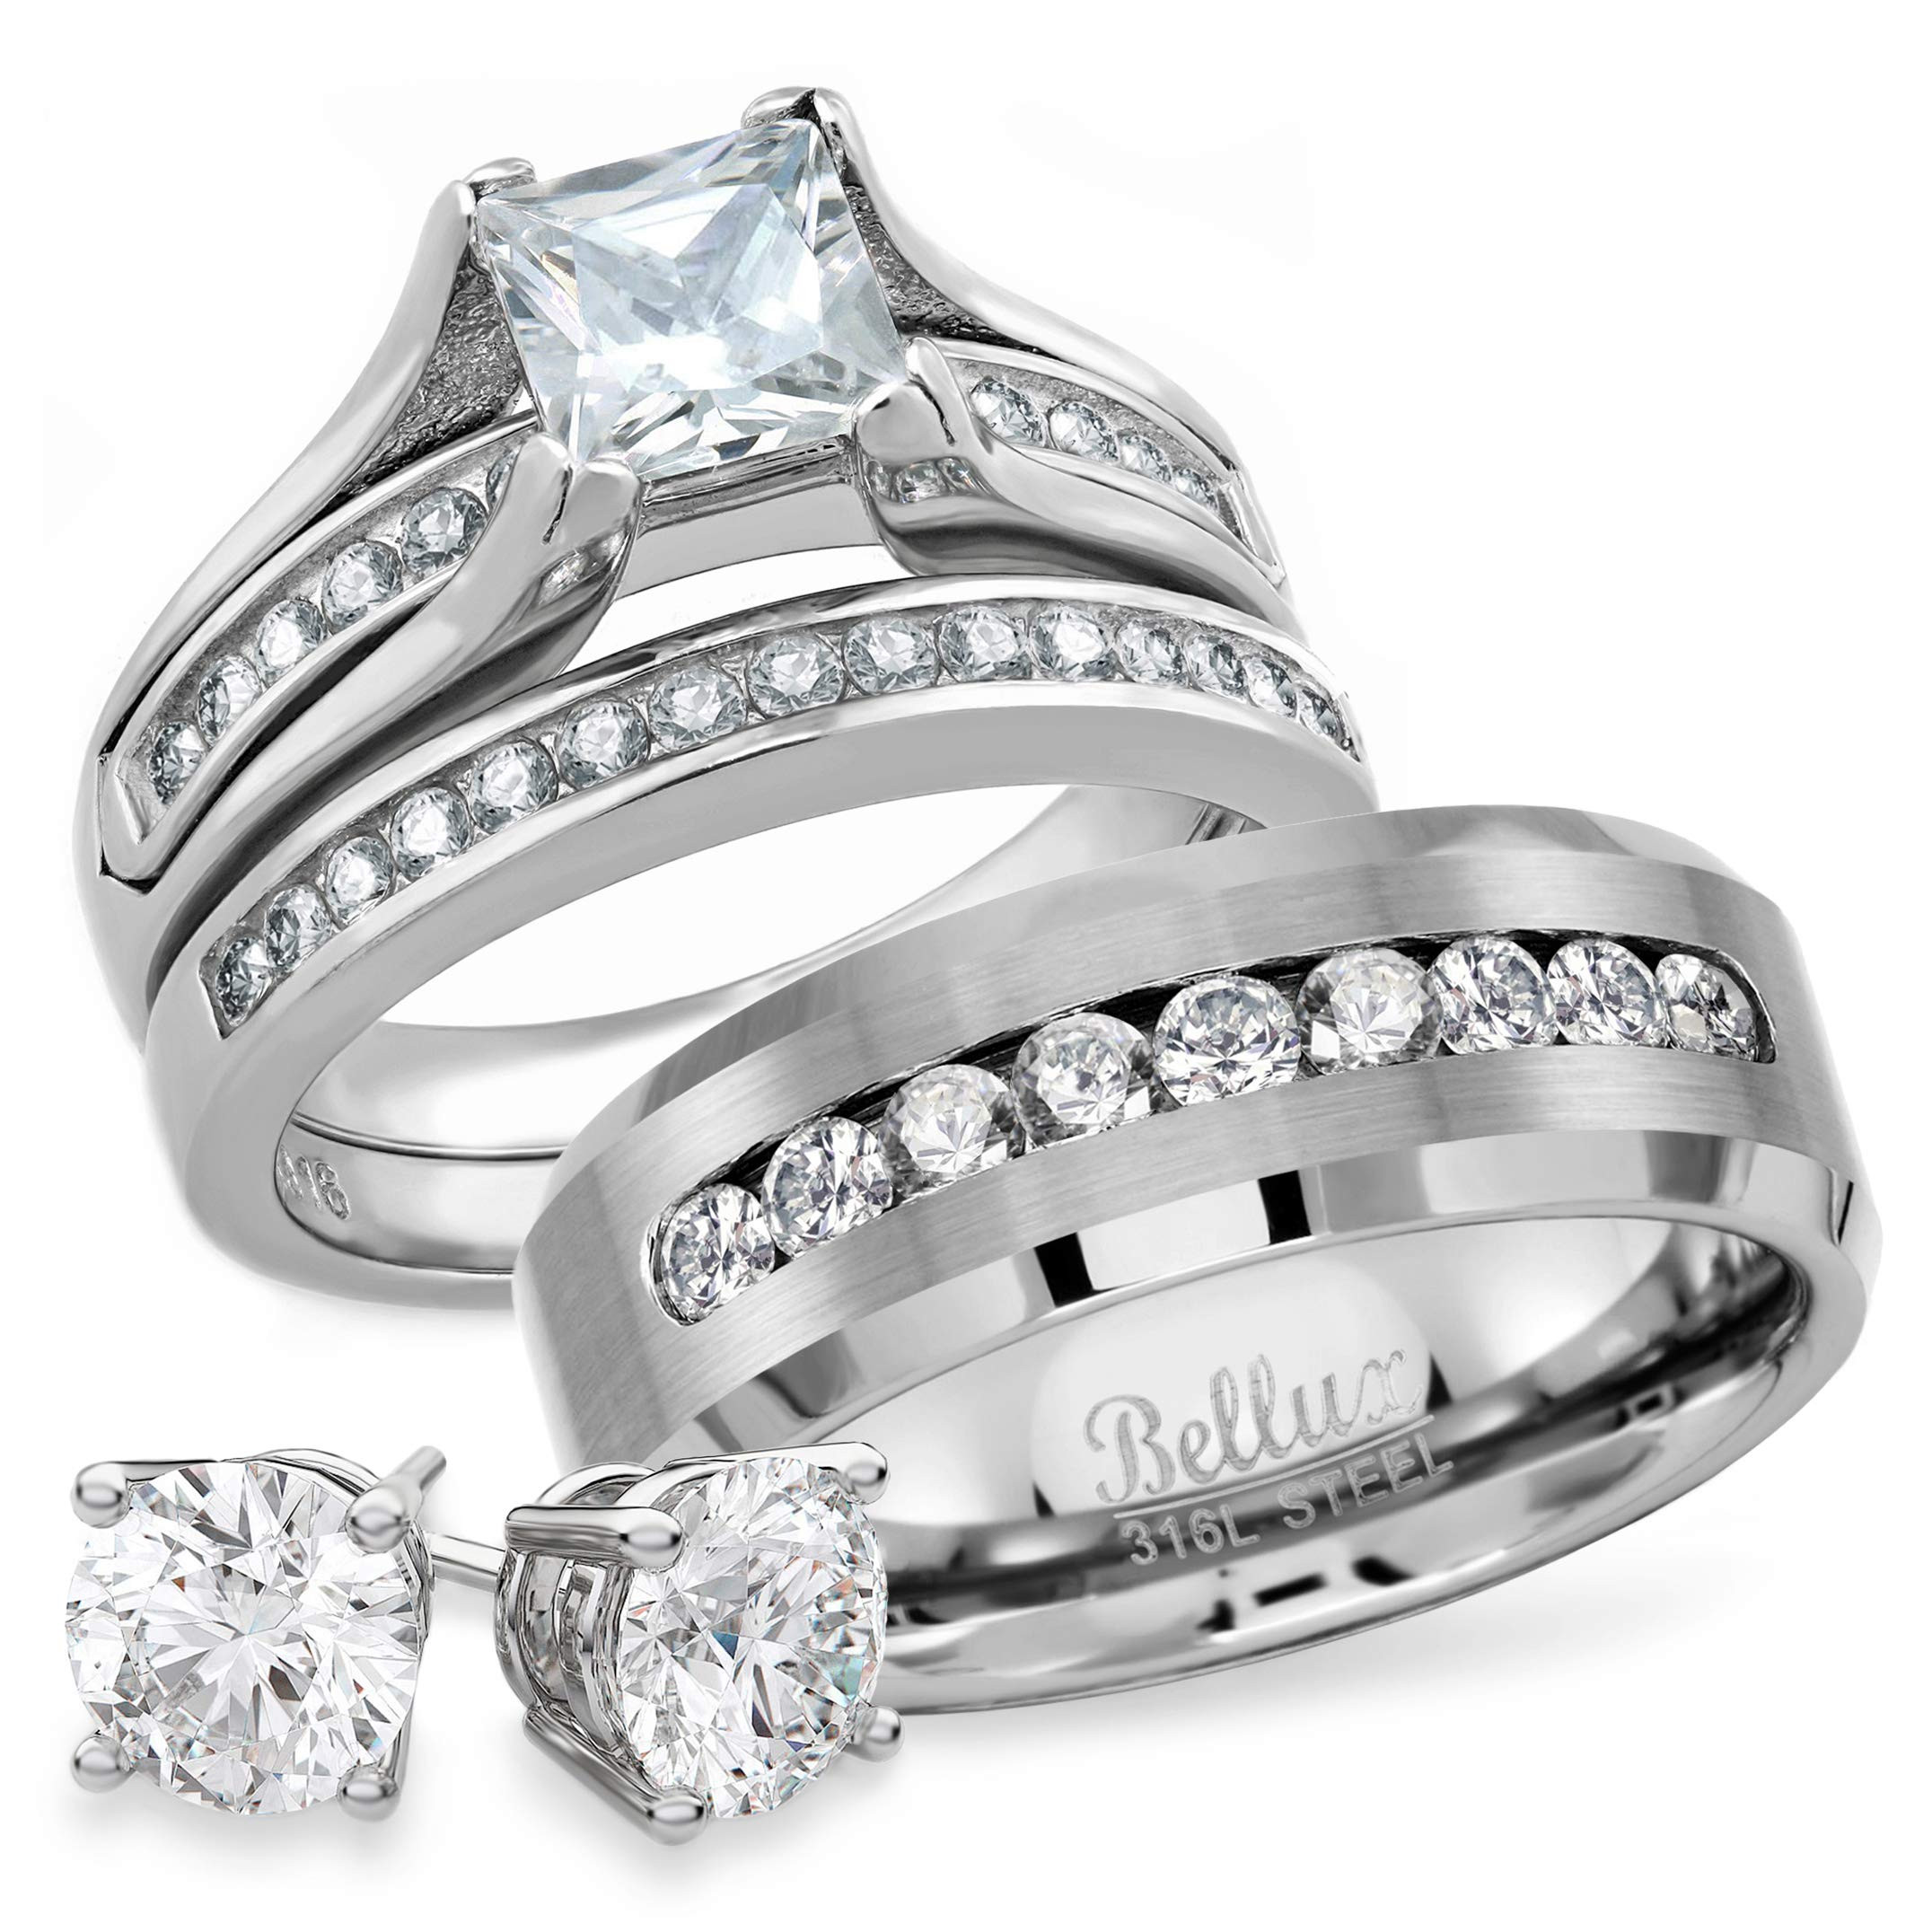 Amazon Wedding Rings Sets
 Bellux Style His and Hers Wedding Rings Set for Him and